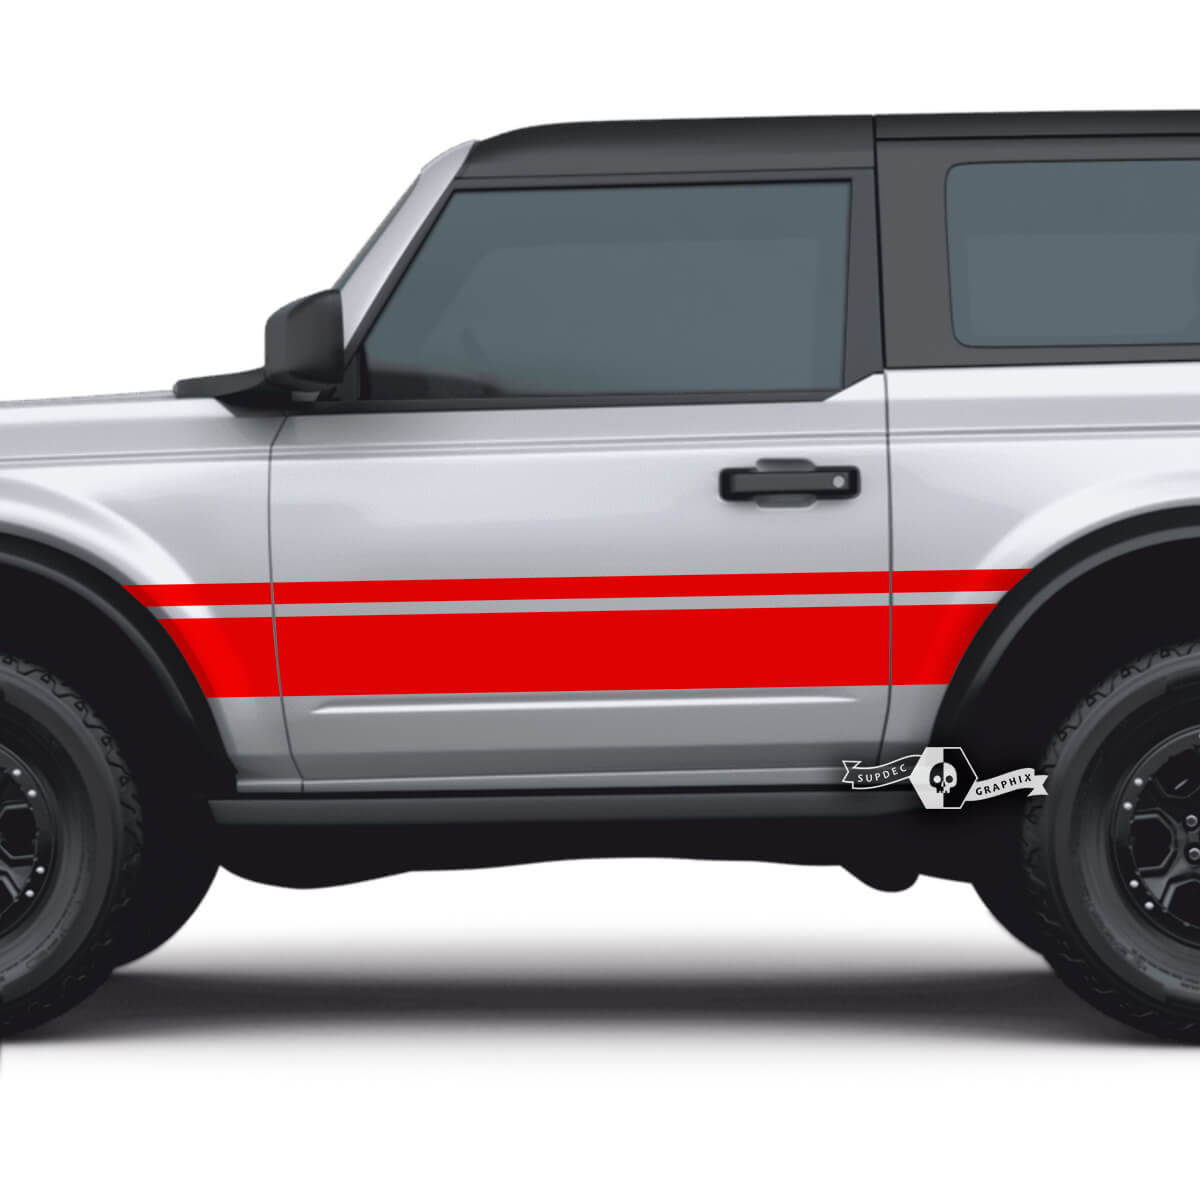 2x Set of 2 Doors Ford Bronco Side Decals Wide Dual Stripes Stickers for Ford Bronco
